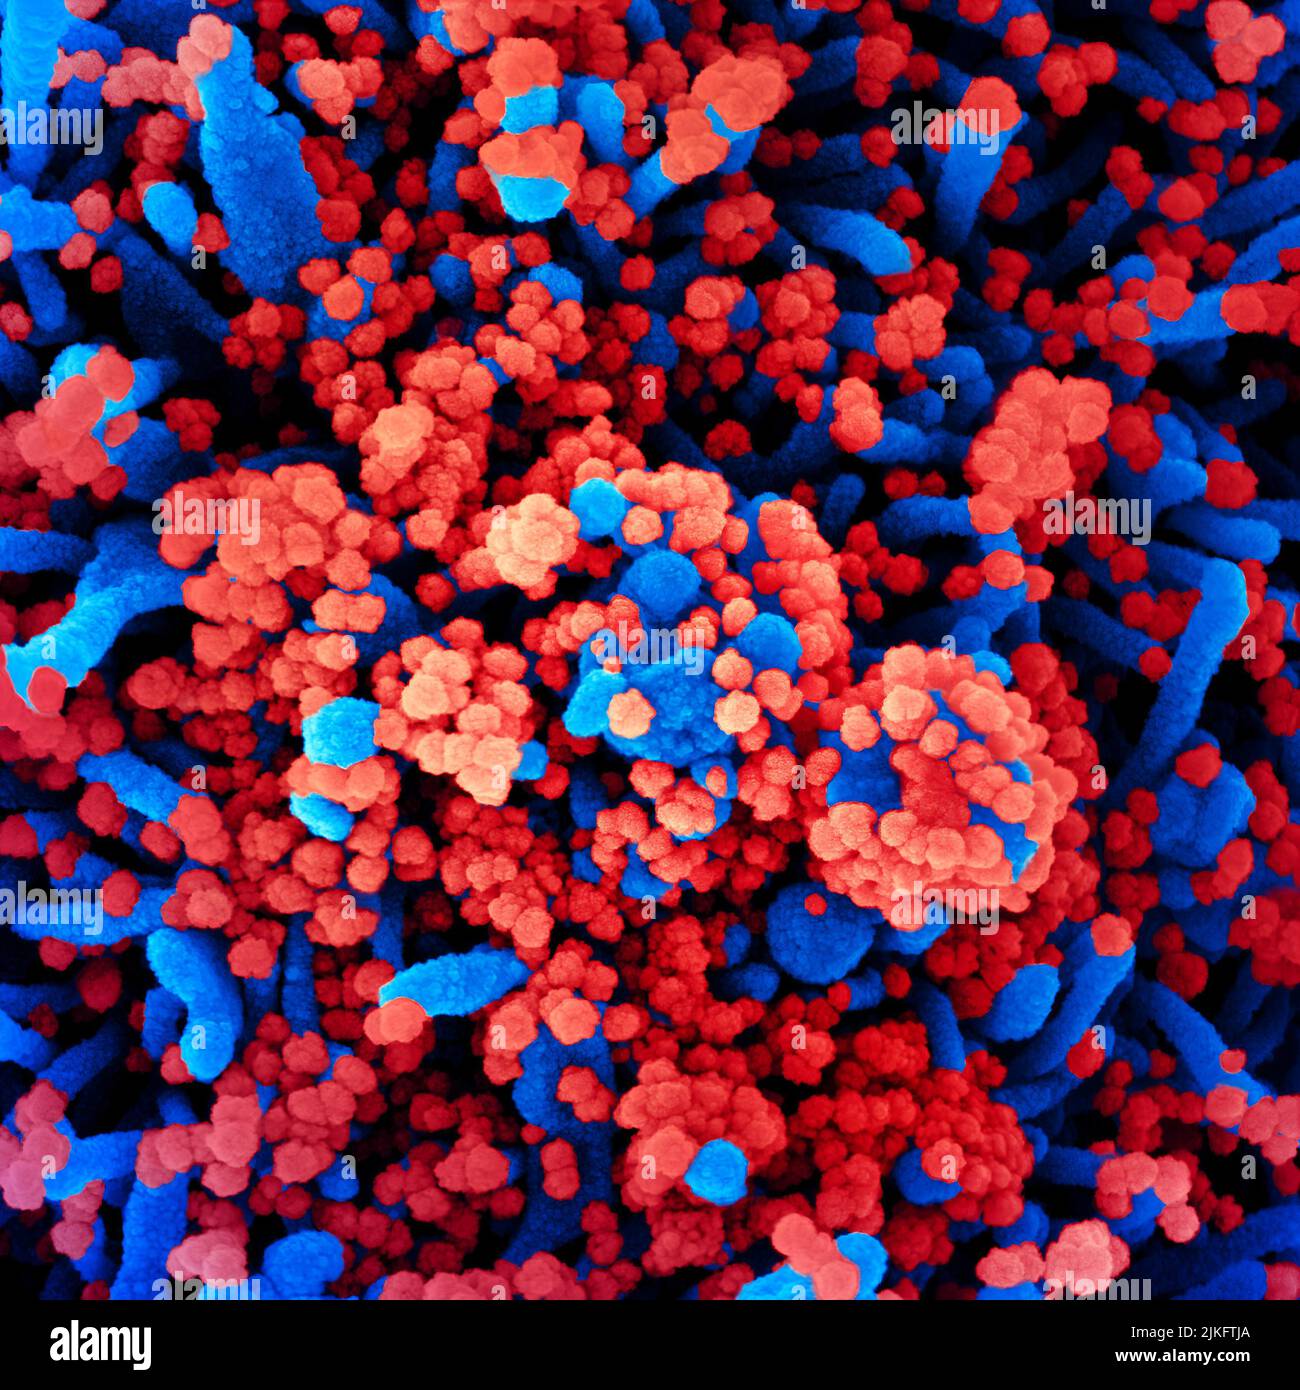 Colorized scanning electron micrograph of a cell (blue) heavily infected with SARS-CoV-2 virus particles (red), isolated from a patient sample. Image requested from the NIAID Integrated Research Facility (IRF) in Fort Detrick, Maryland. Stock Photo